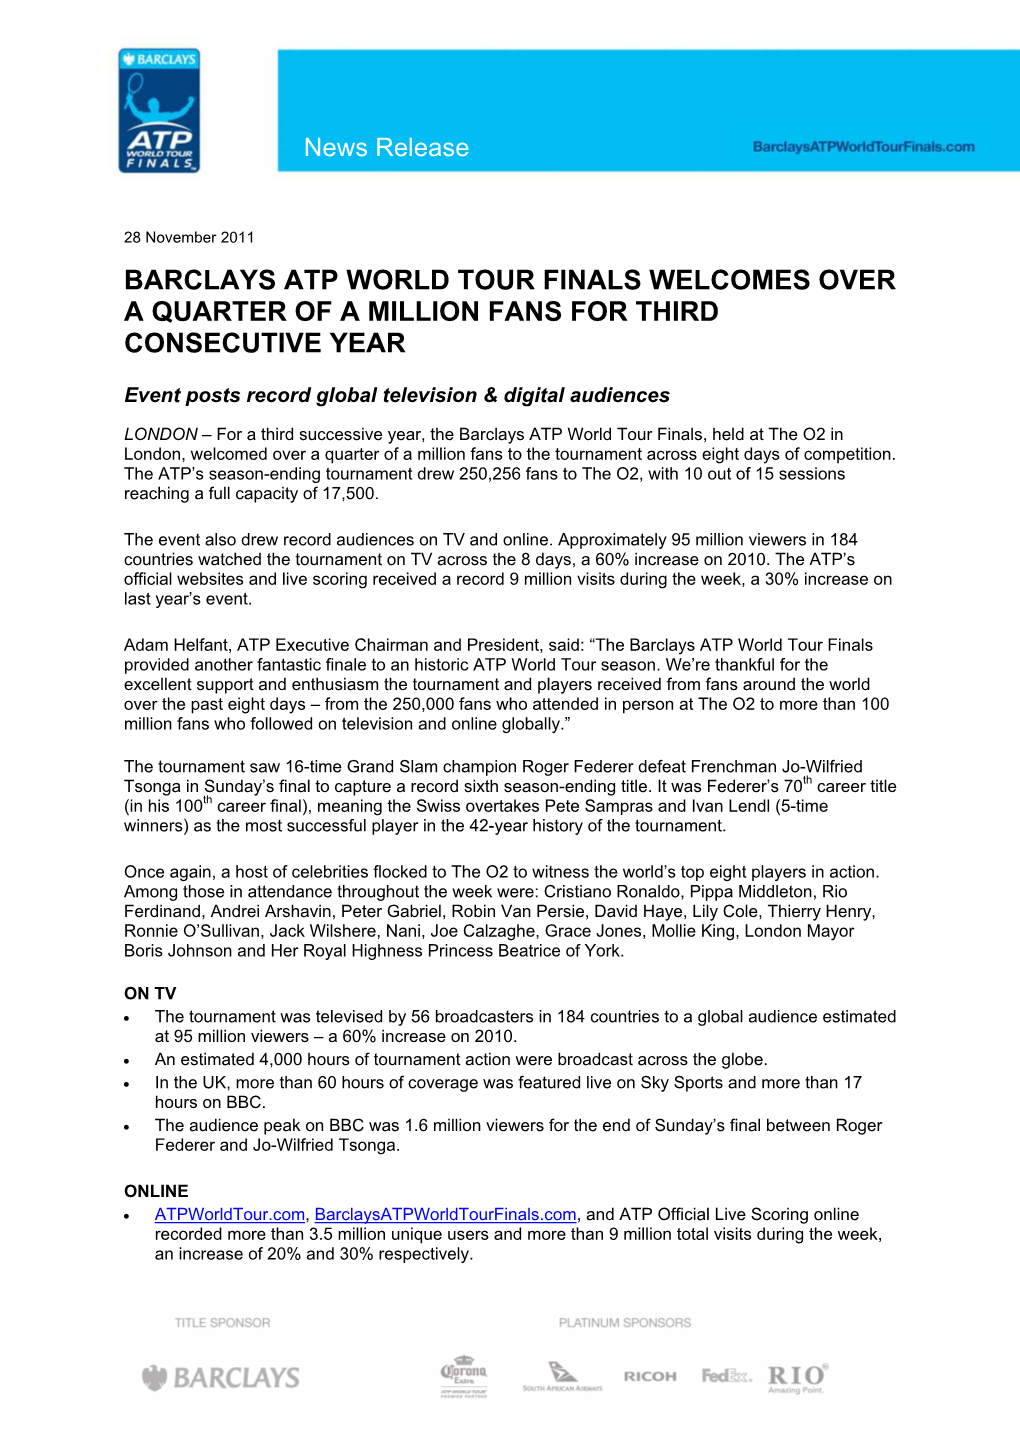 Barclays Atp World Tour Finals Welcomes Over a Quarter of a Million Fans for Third Consecutive Year